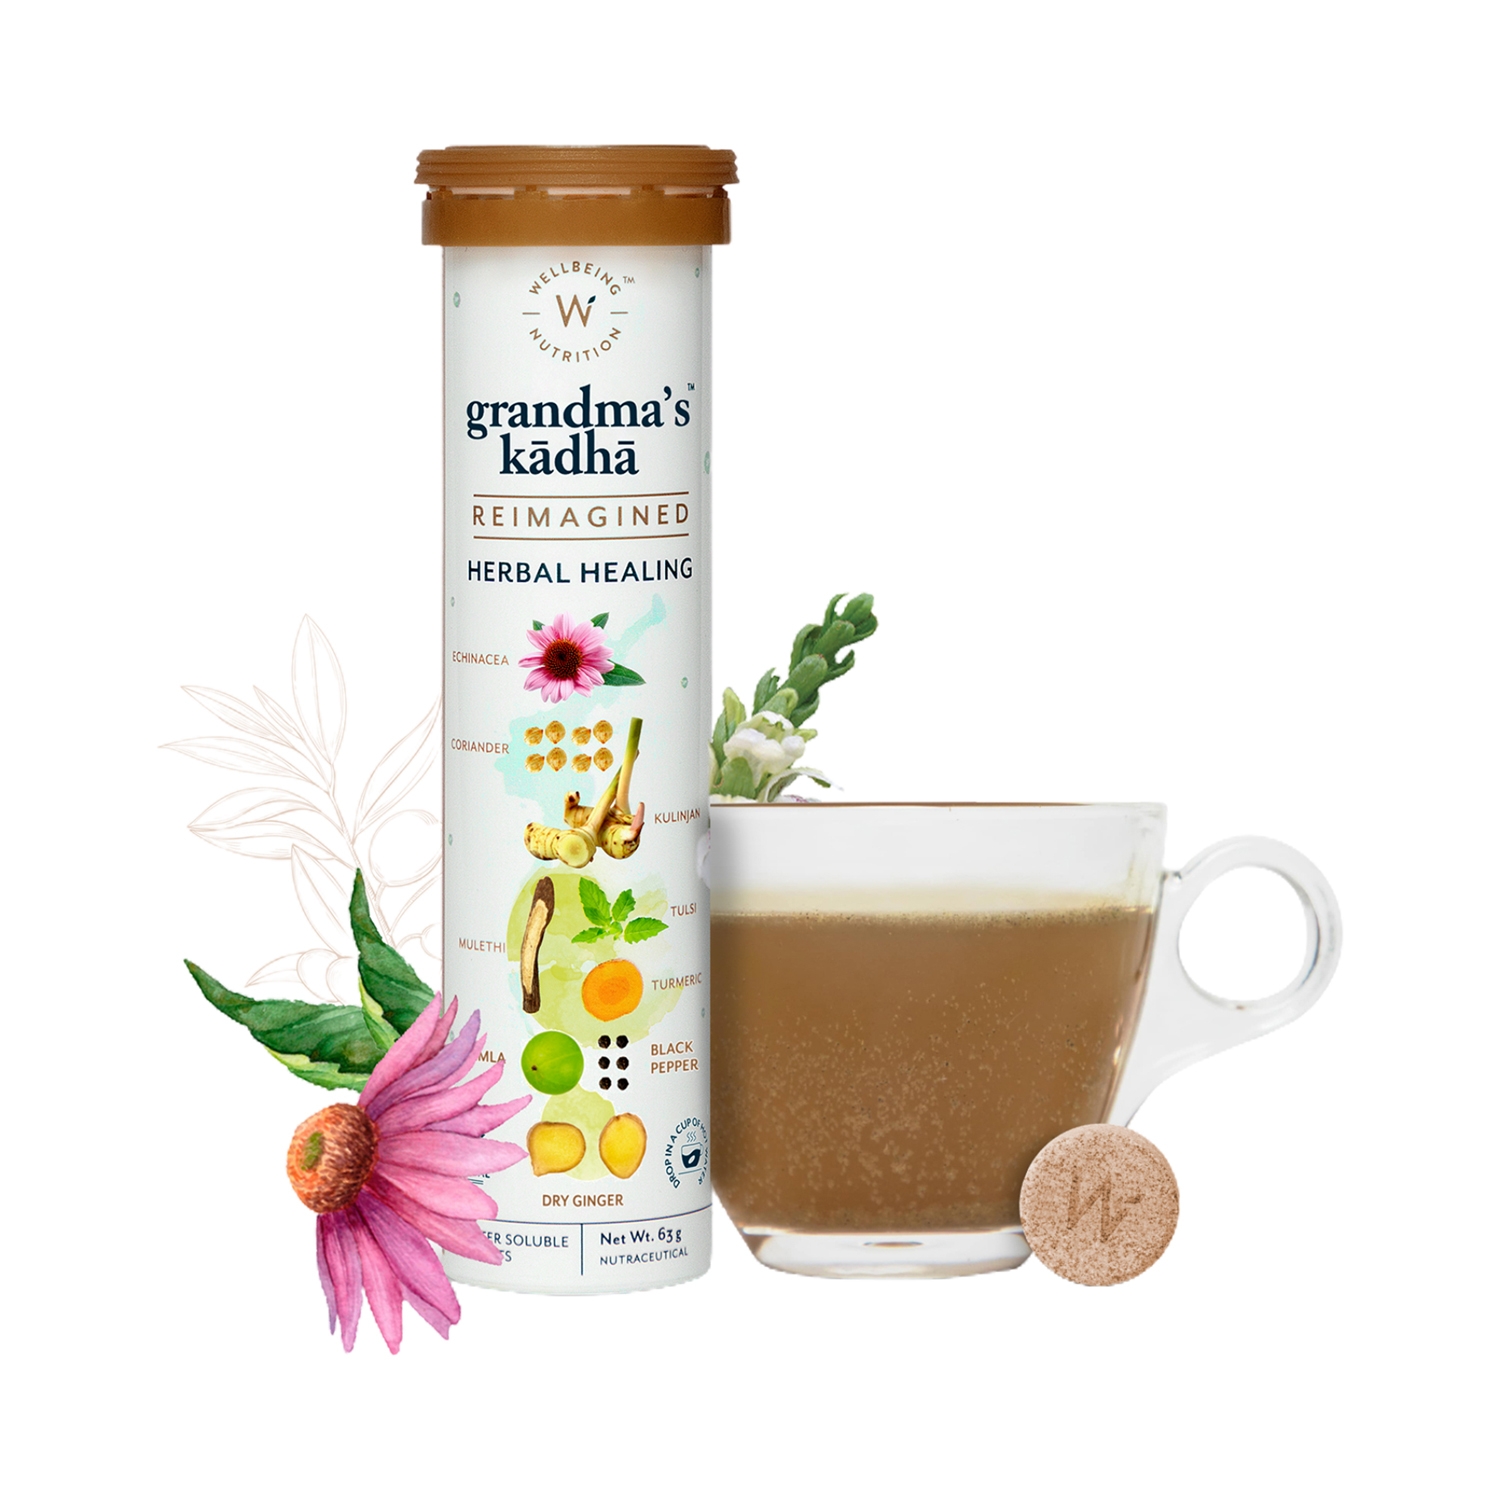 Wellbeing Nutrition | Wellbeing Nutrition Grandma's Kadha for Immunity, Cough, Cold and Flu Symptom Support